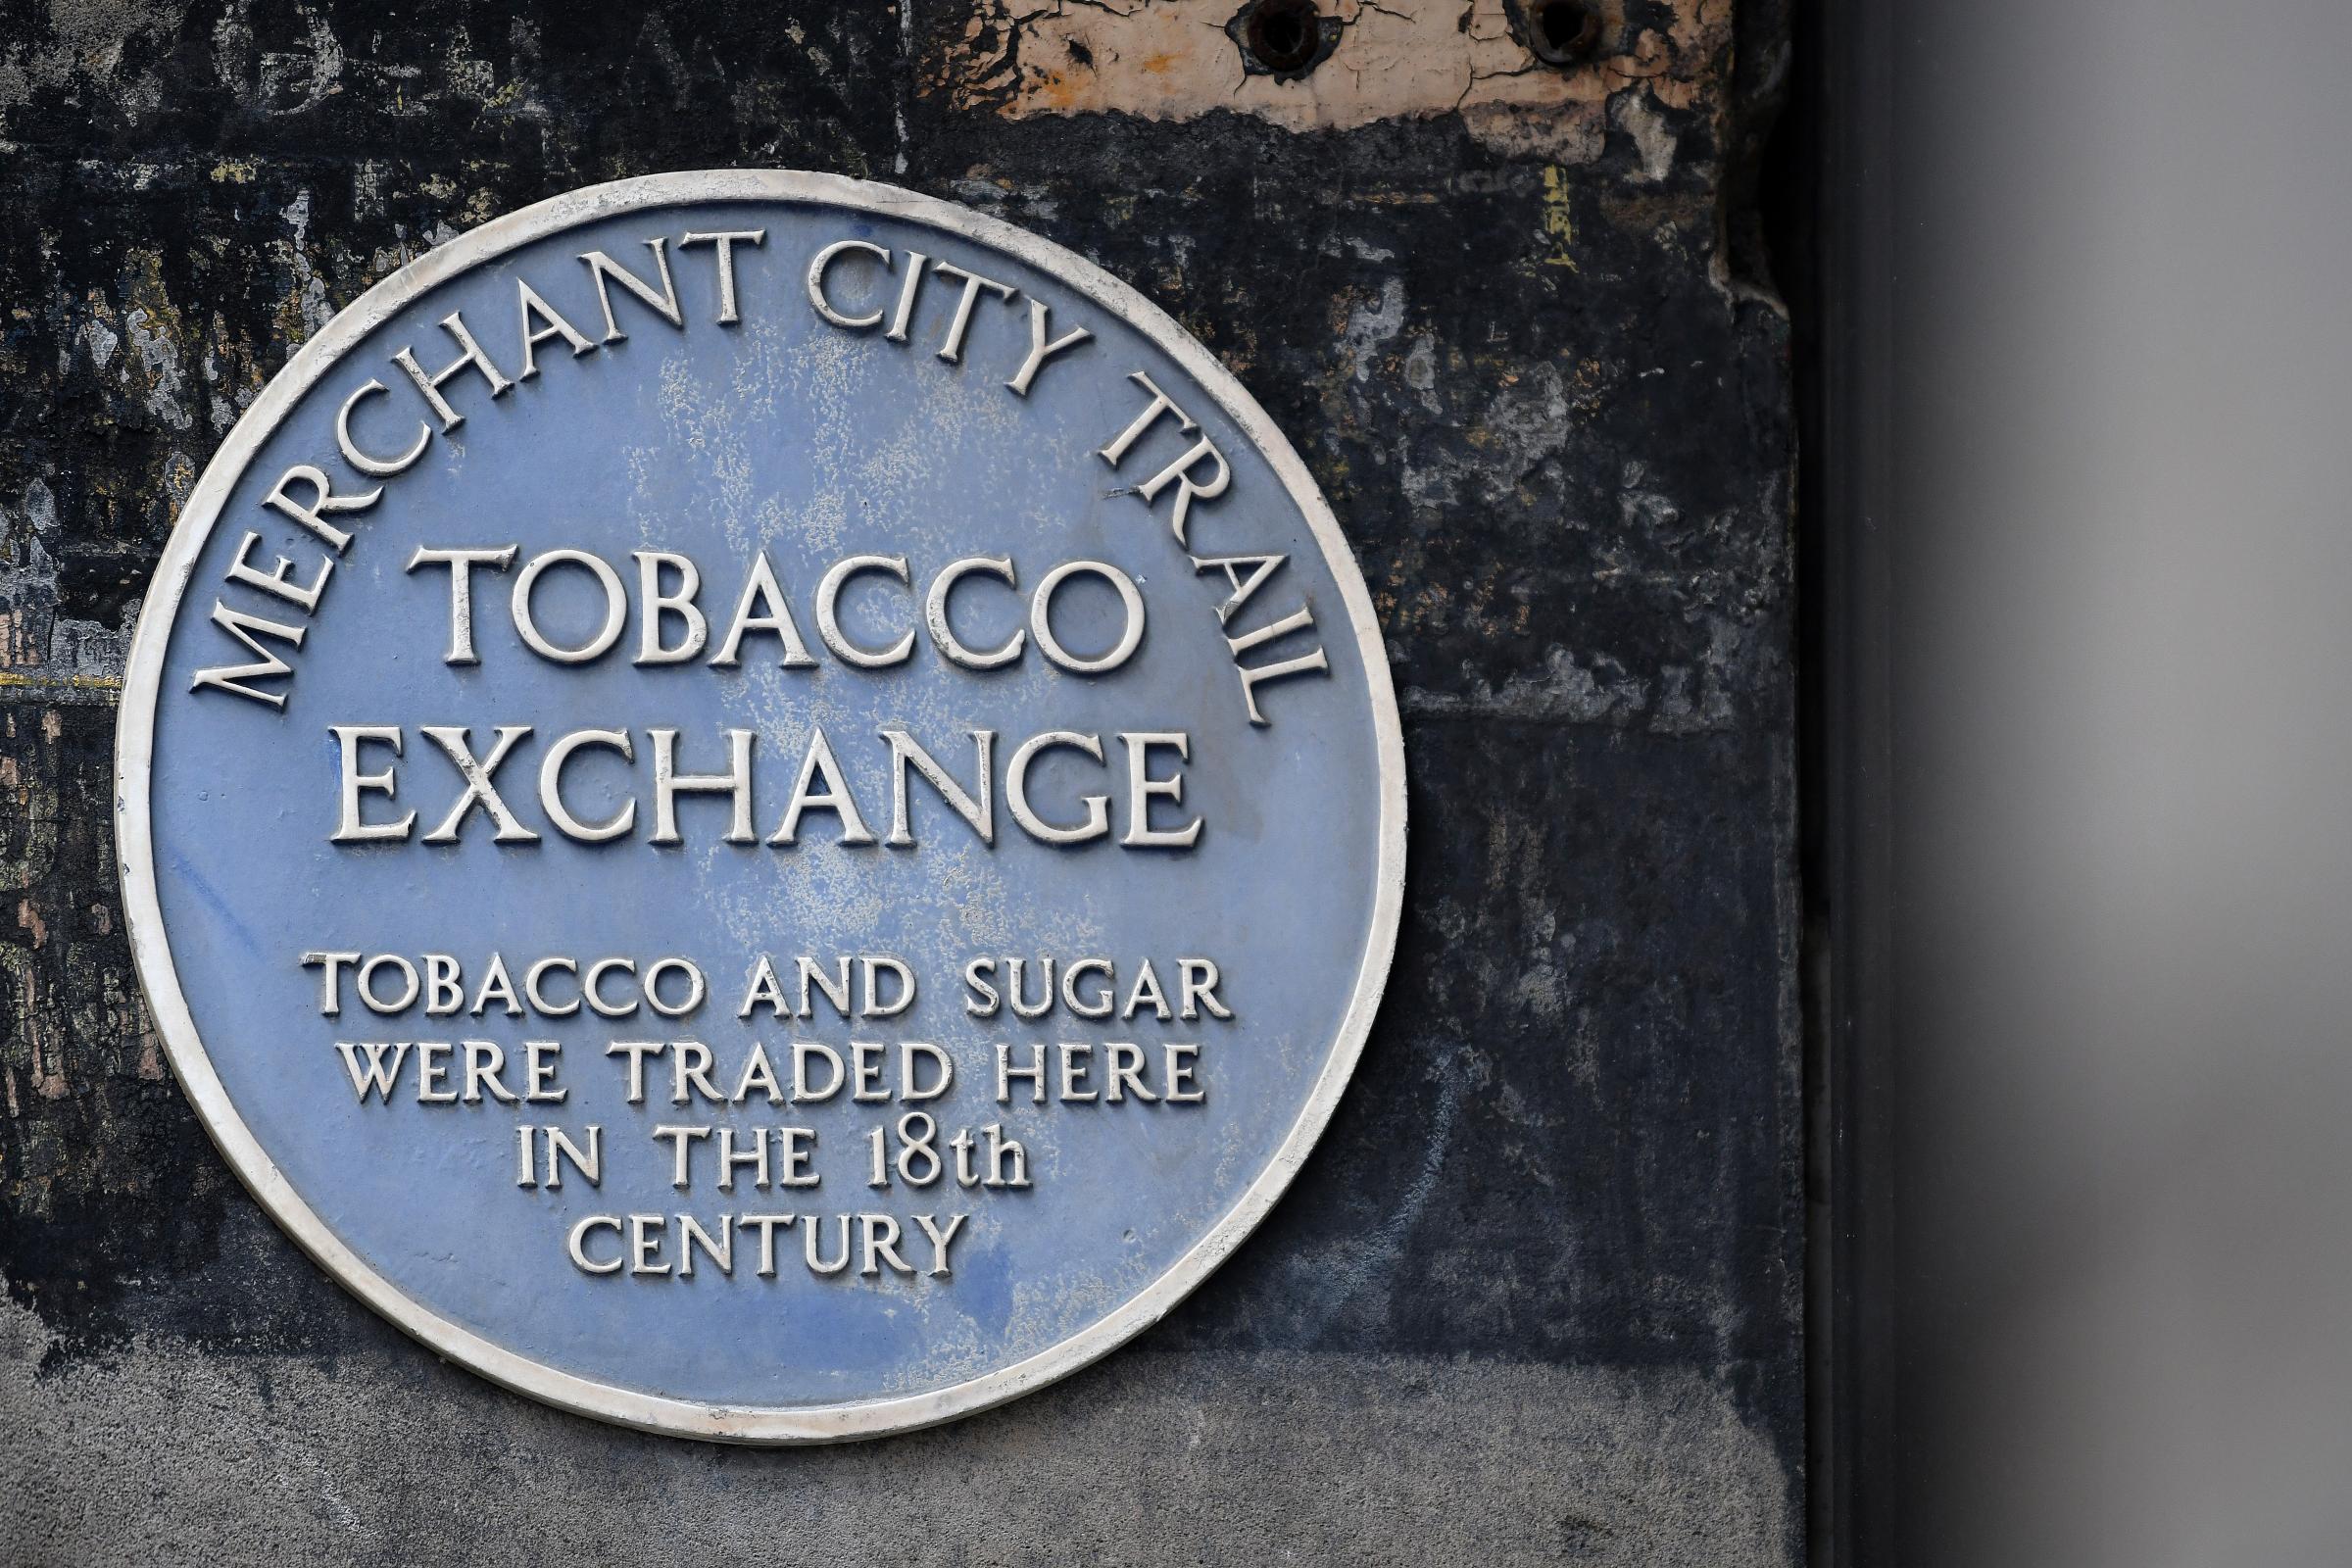 A plaque near The Tobacco Merchants House in the Merchant City